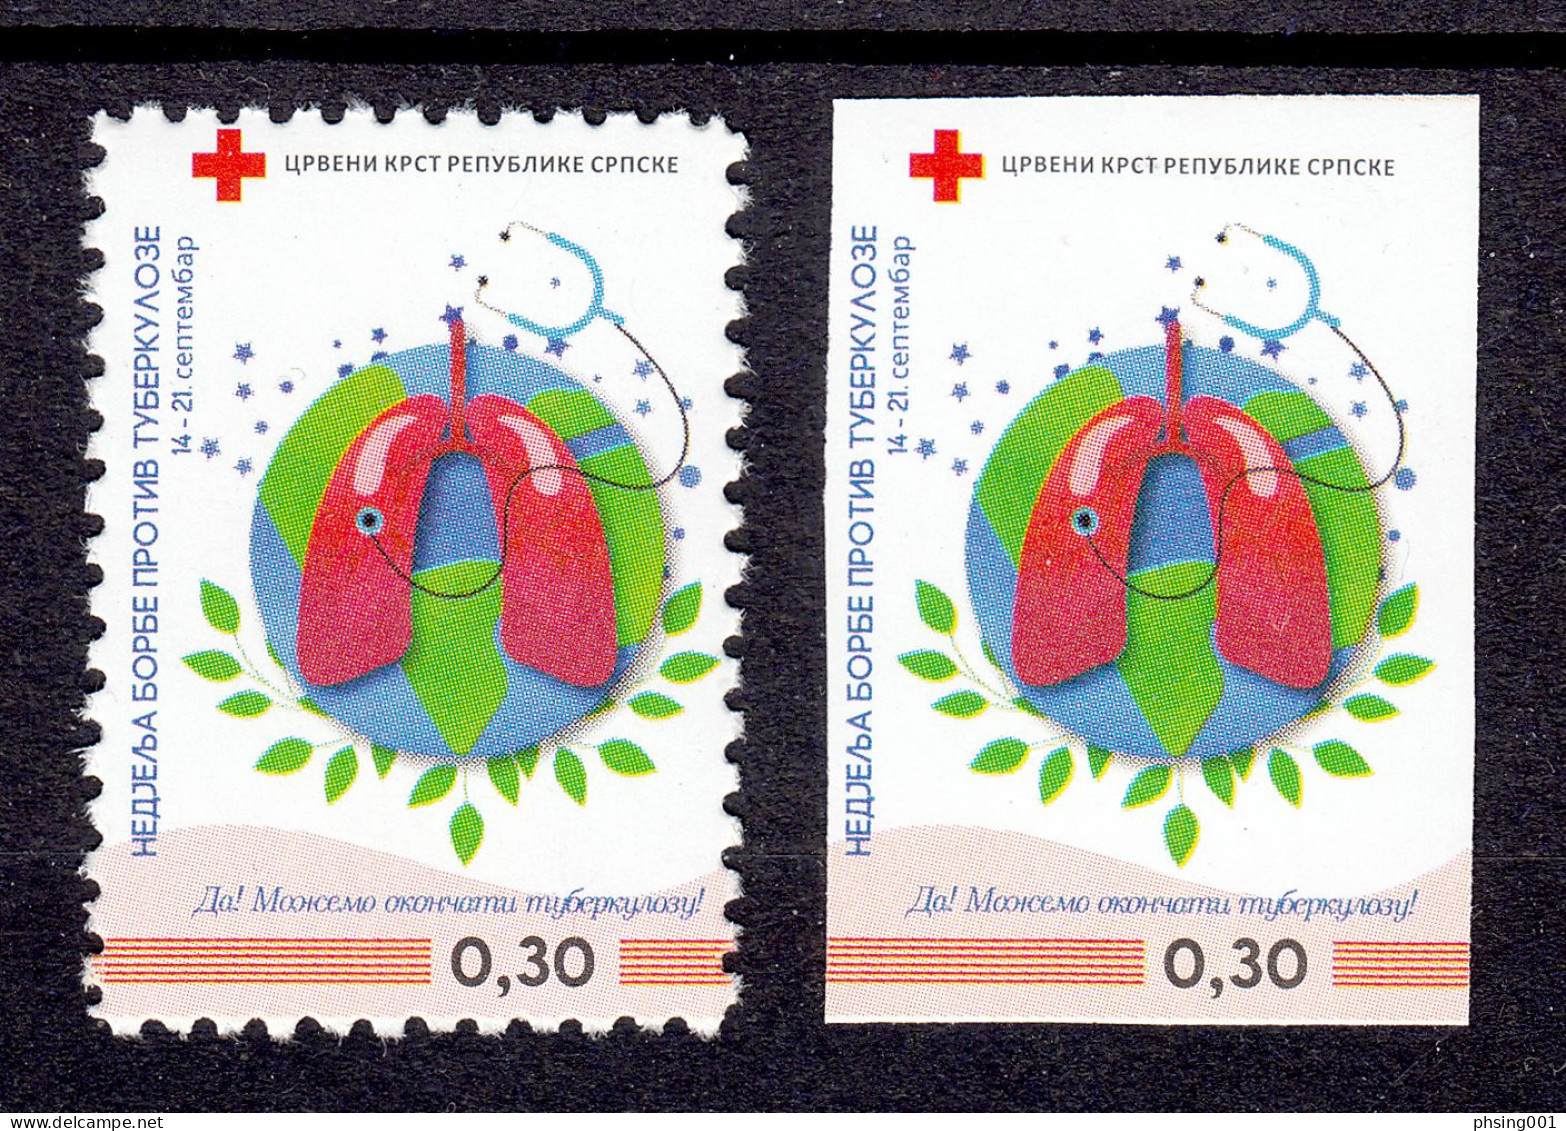 Bosnia Serbia 2023 TBC Red Cross Croix Rouge Rotes Kreuz Tax Charity Surcharge Perforated+imperforated Stamp MNH - Red Cross